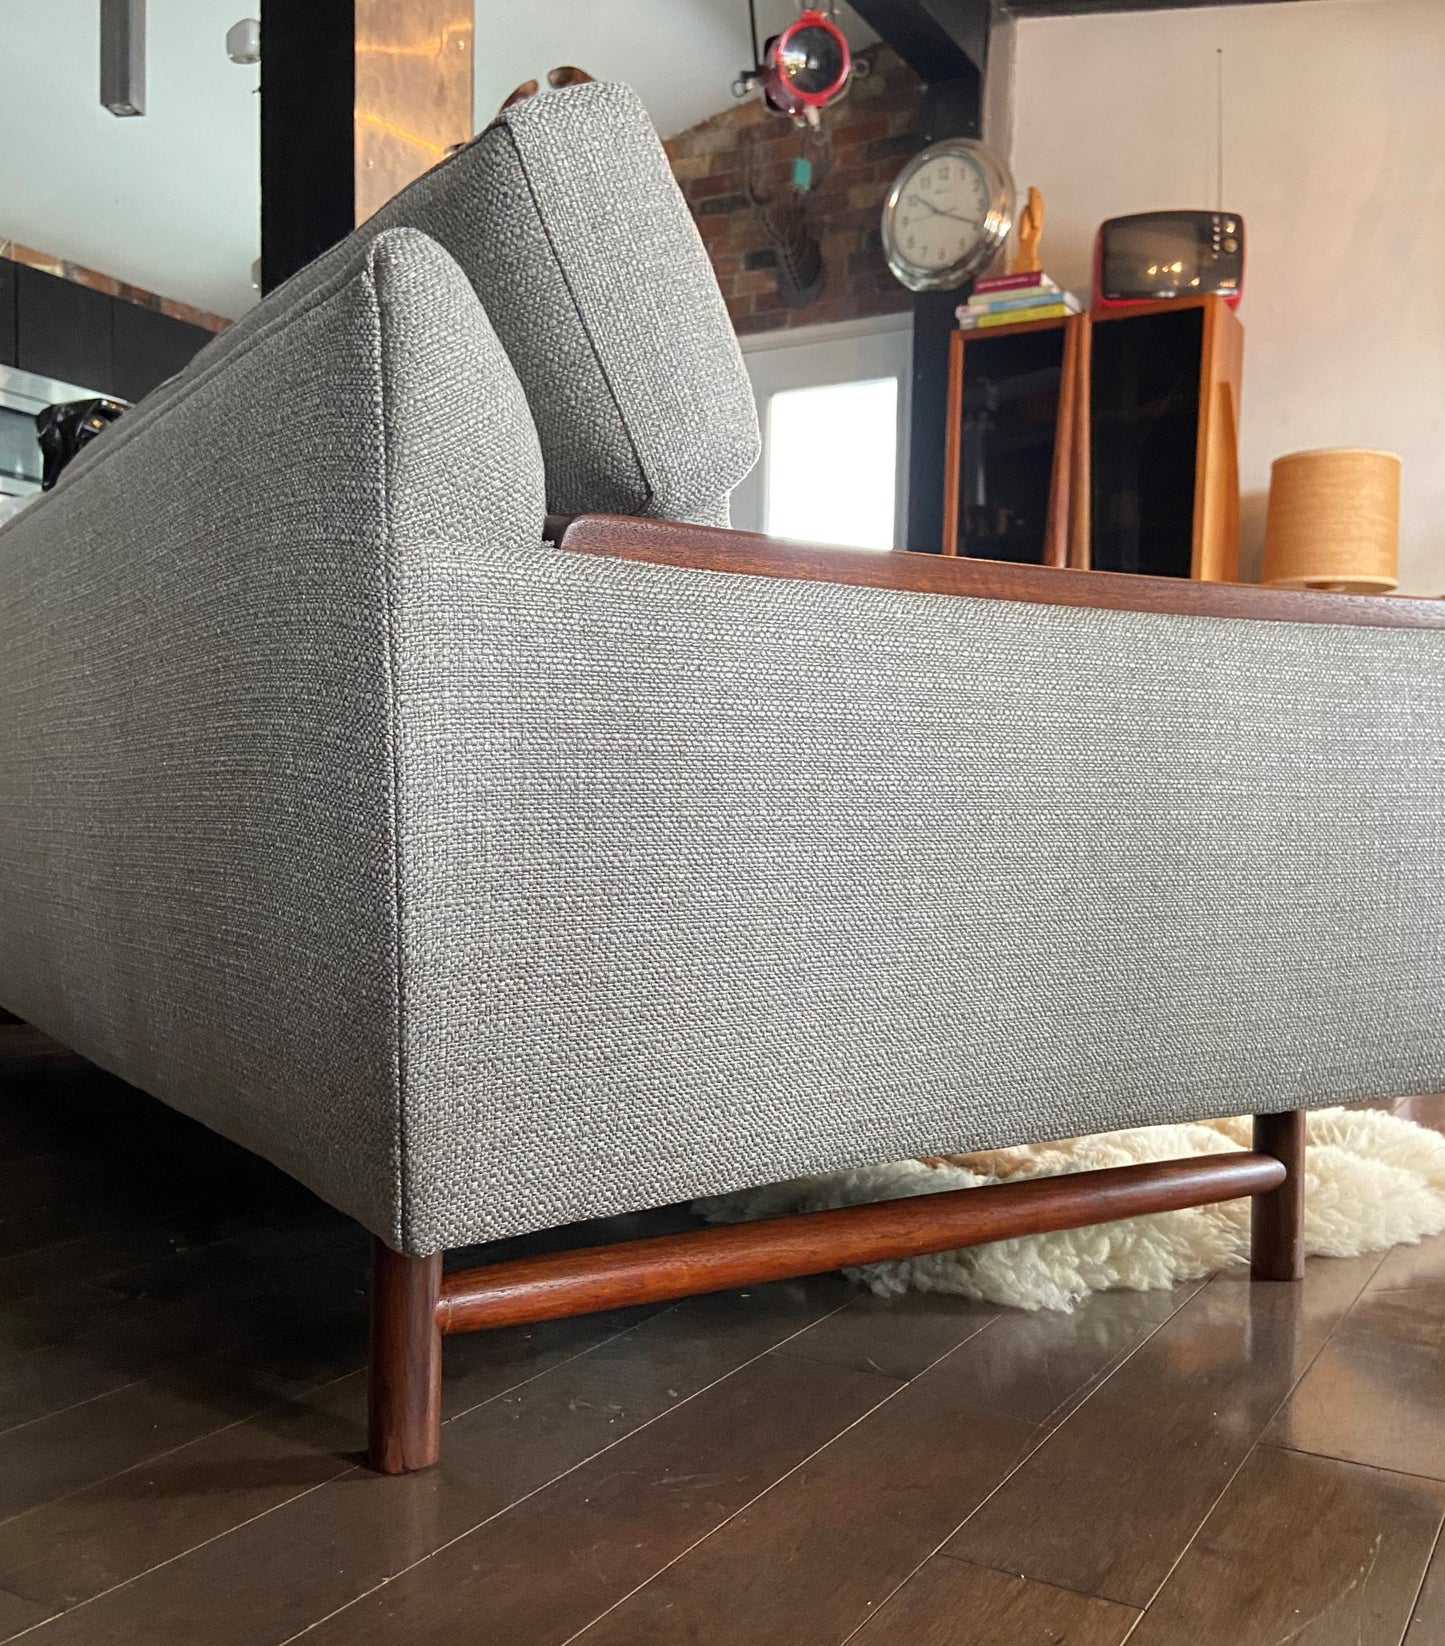 REFINISHED REUPHOLSTERED in Greige Performance Fabric High Quality MCM Sofa by SELIG - PERFECT